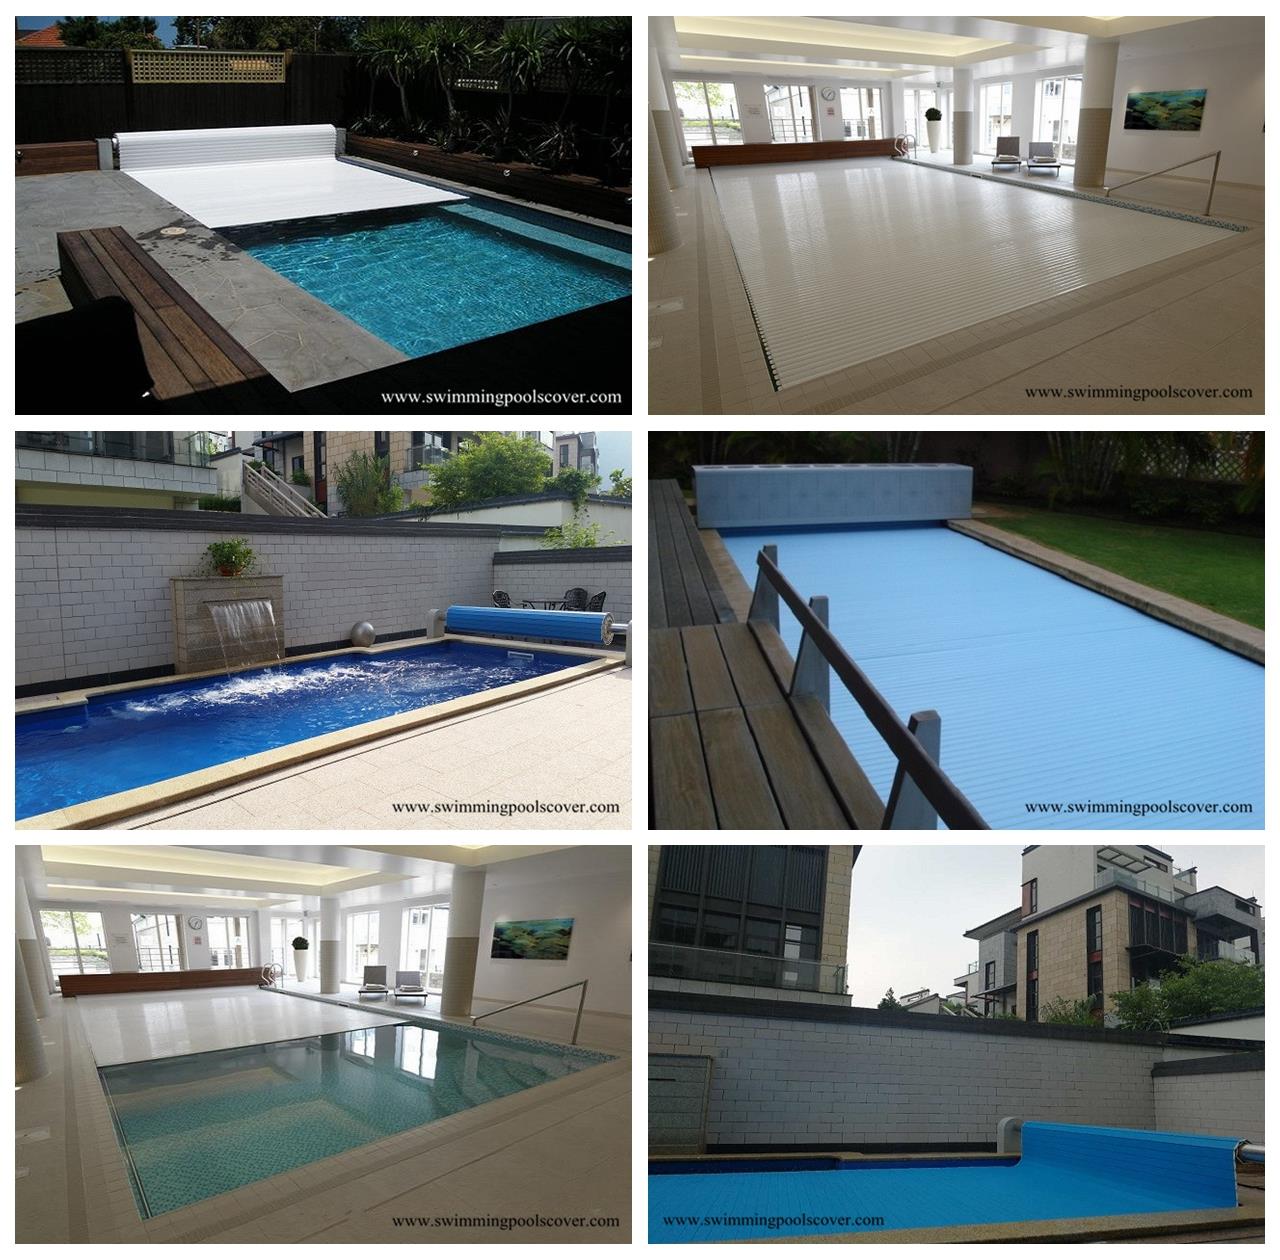 Automatic Hard Swimming Pool Covers Above Ground Outdoor You Can Walk On.jpg